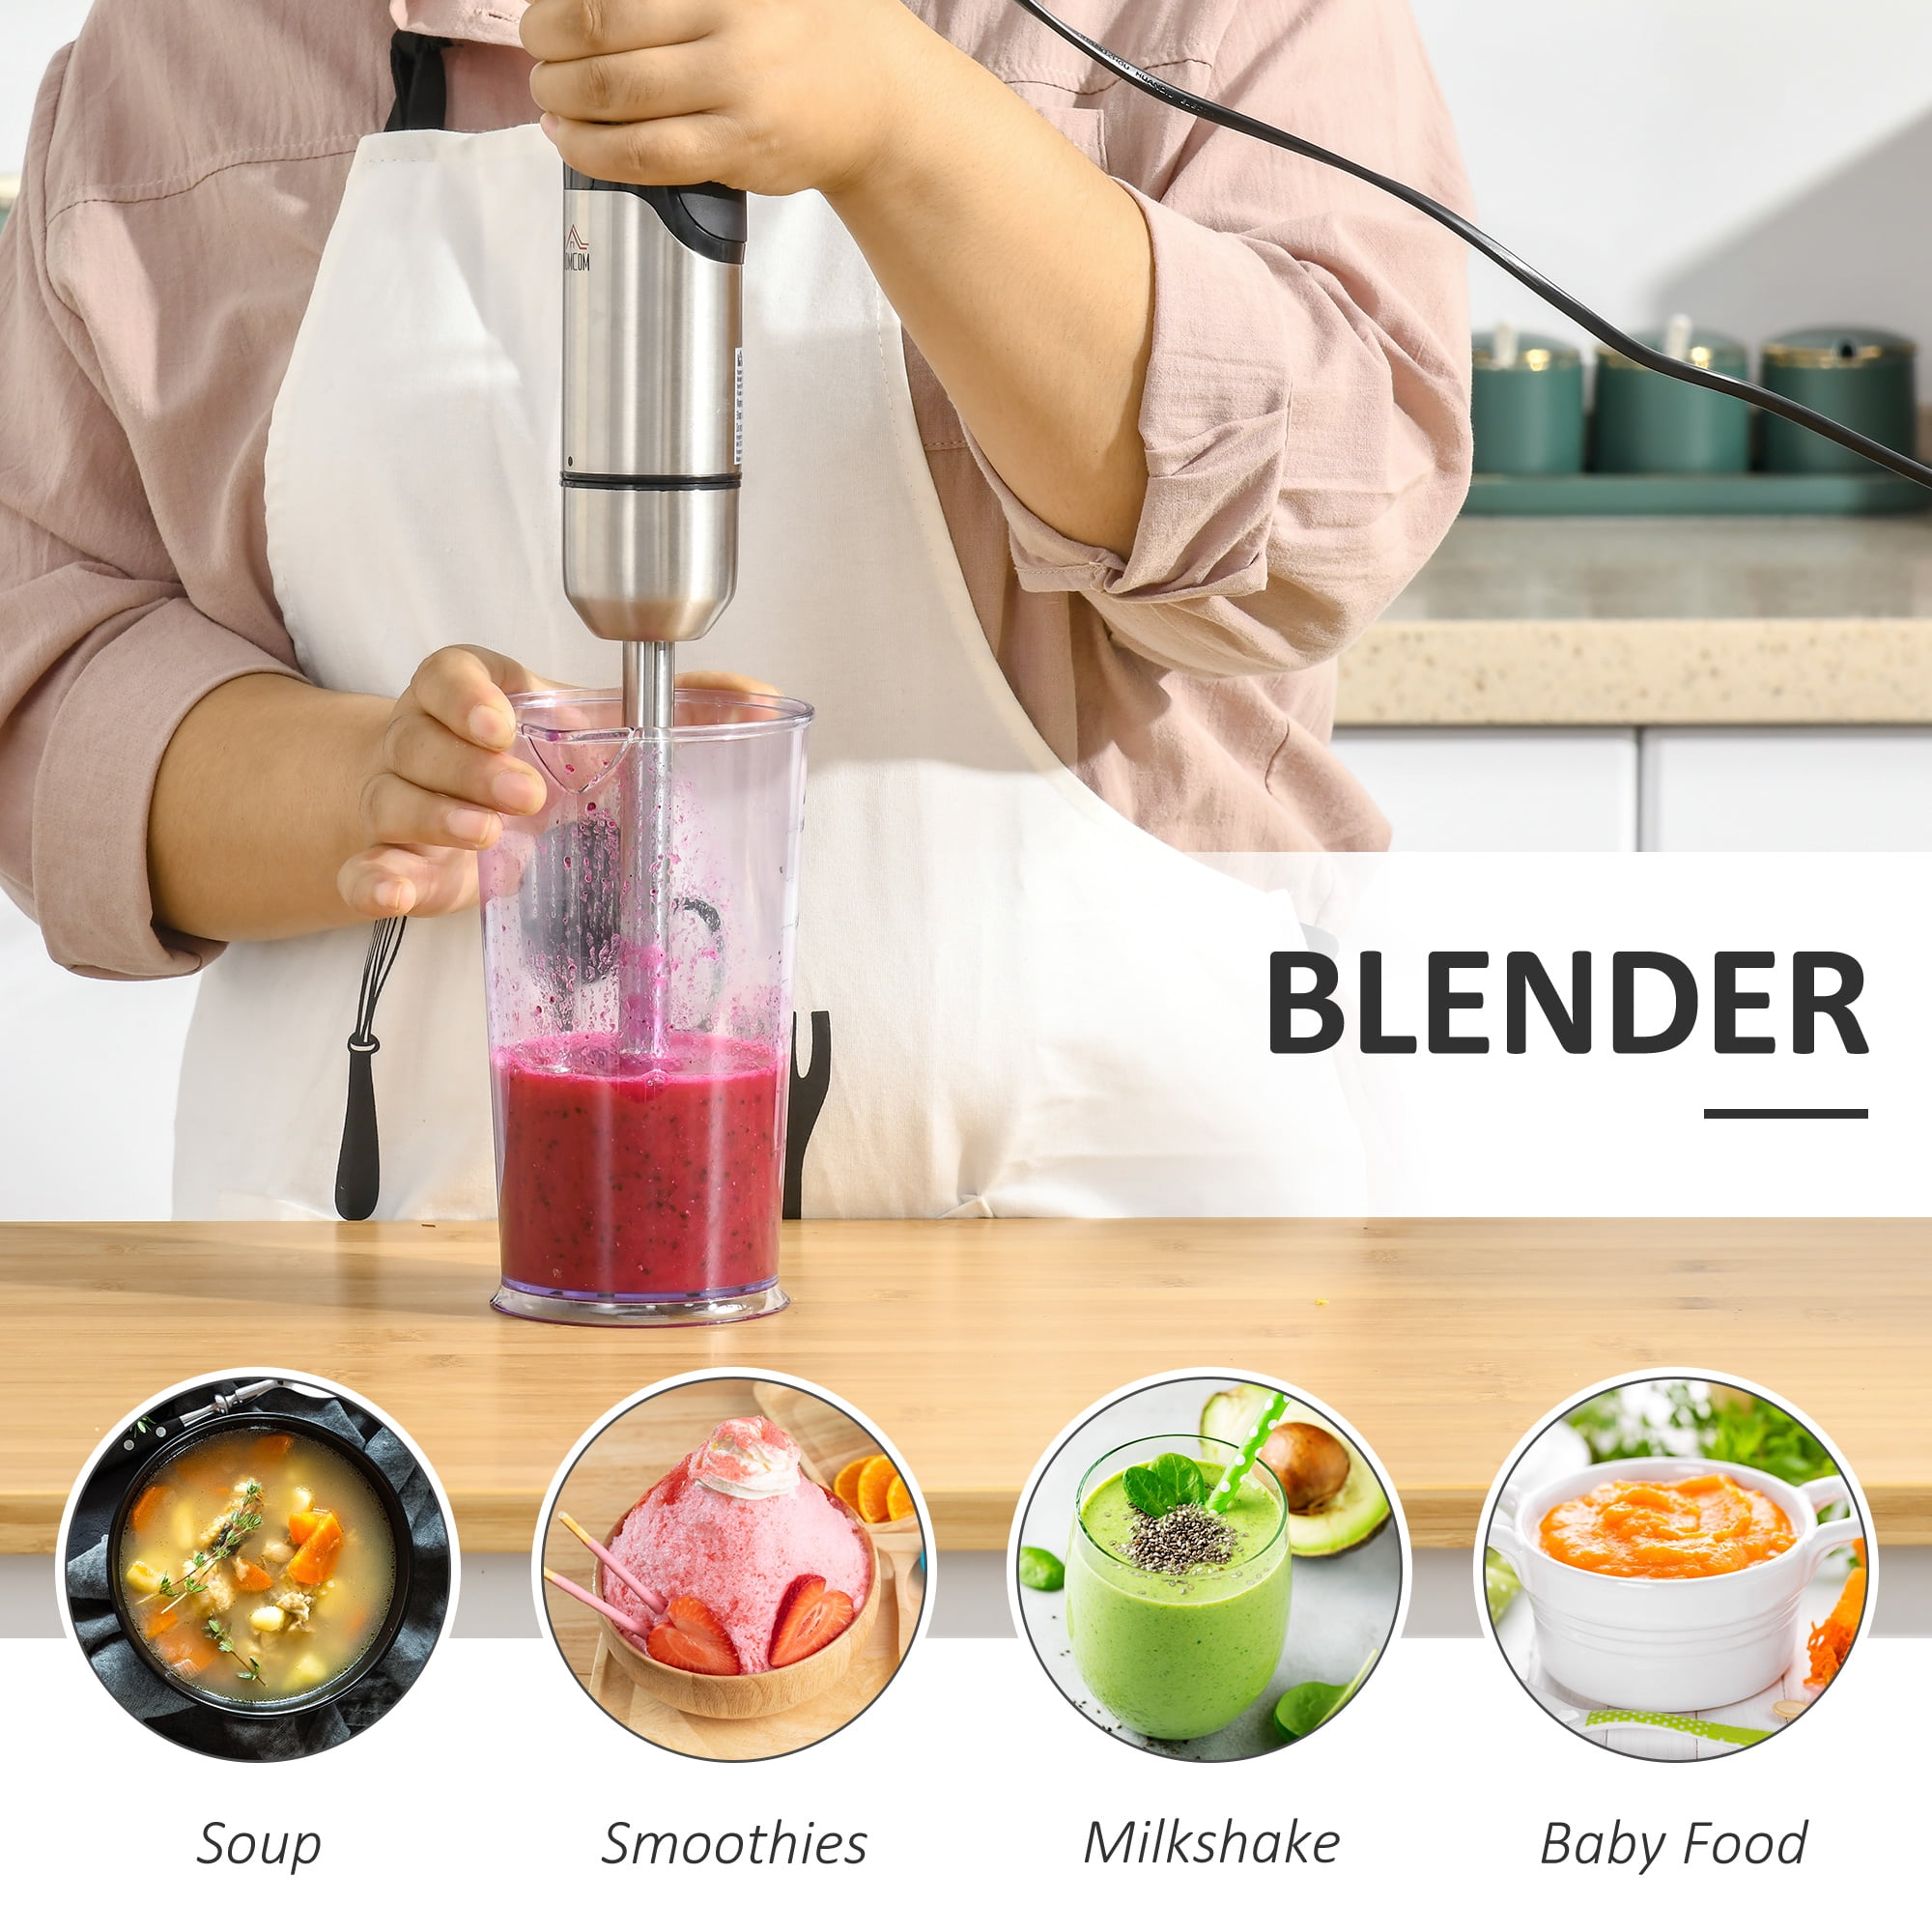 400W 4 in 1 Stainless Steel Stem Hand Blender with Chopper and Whisk